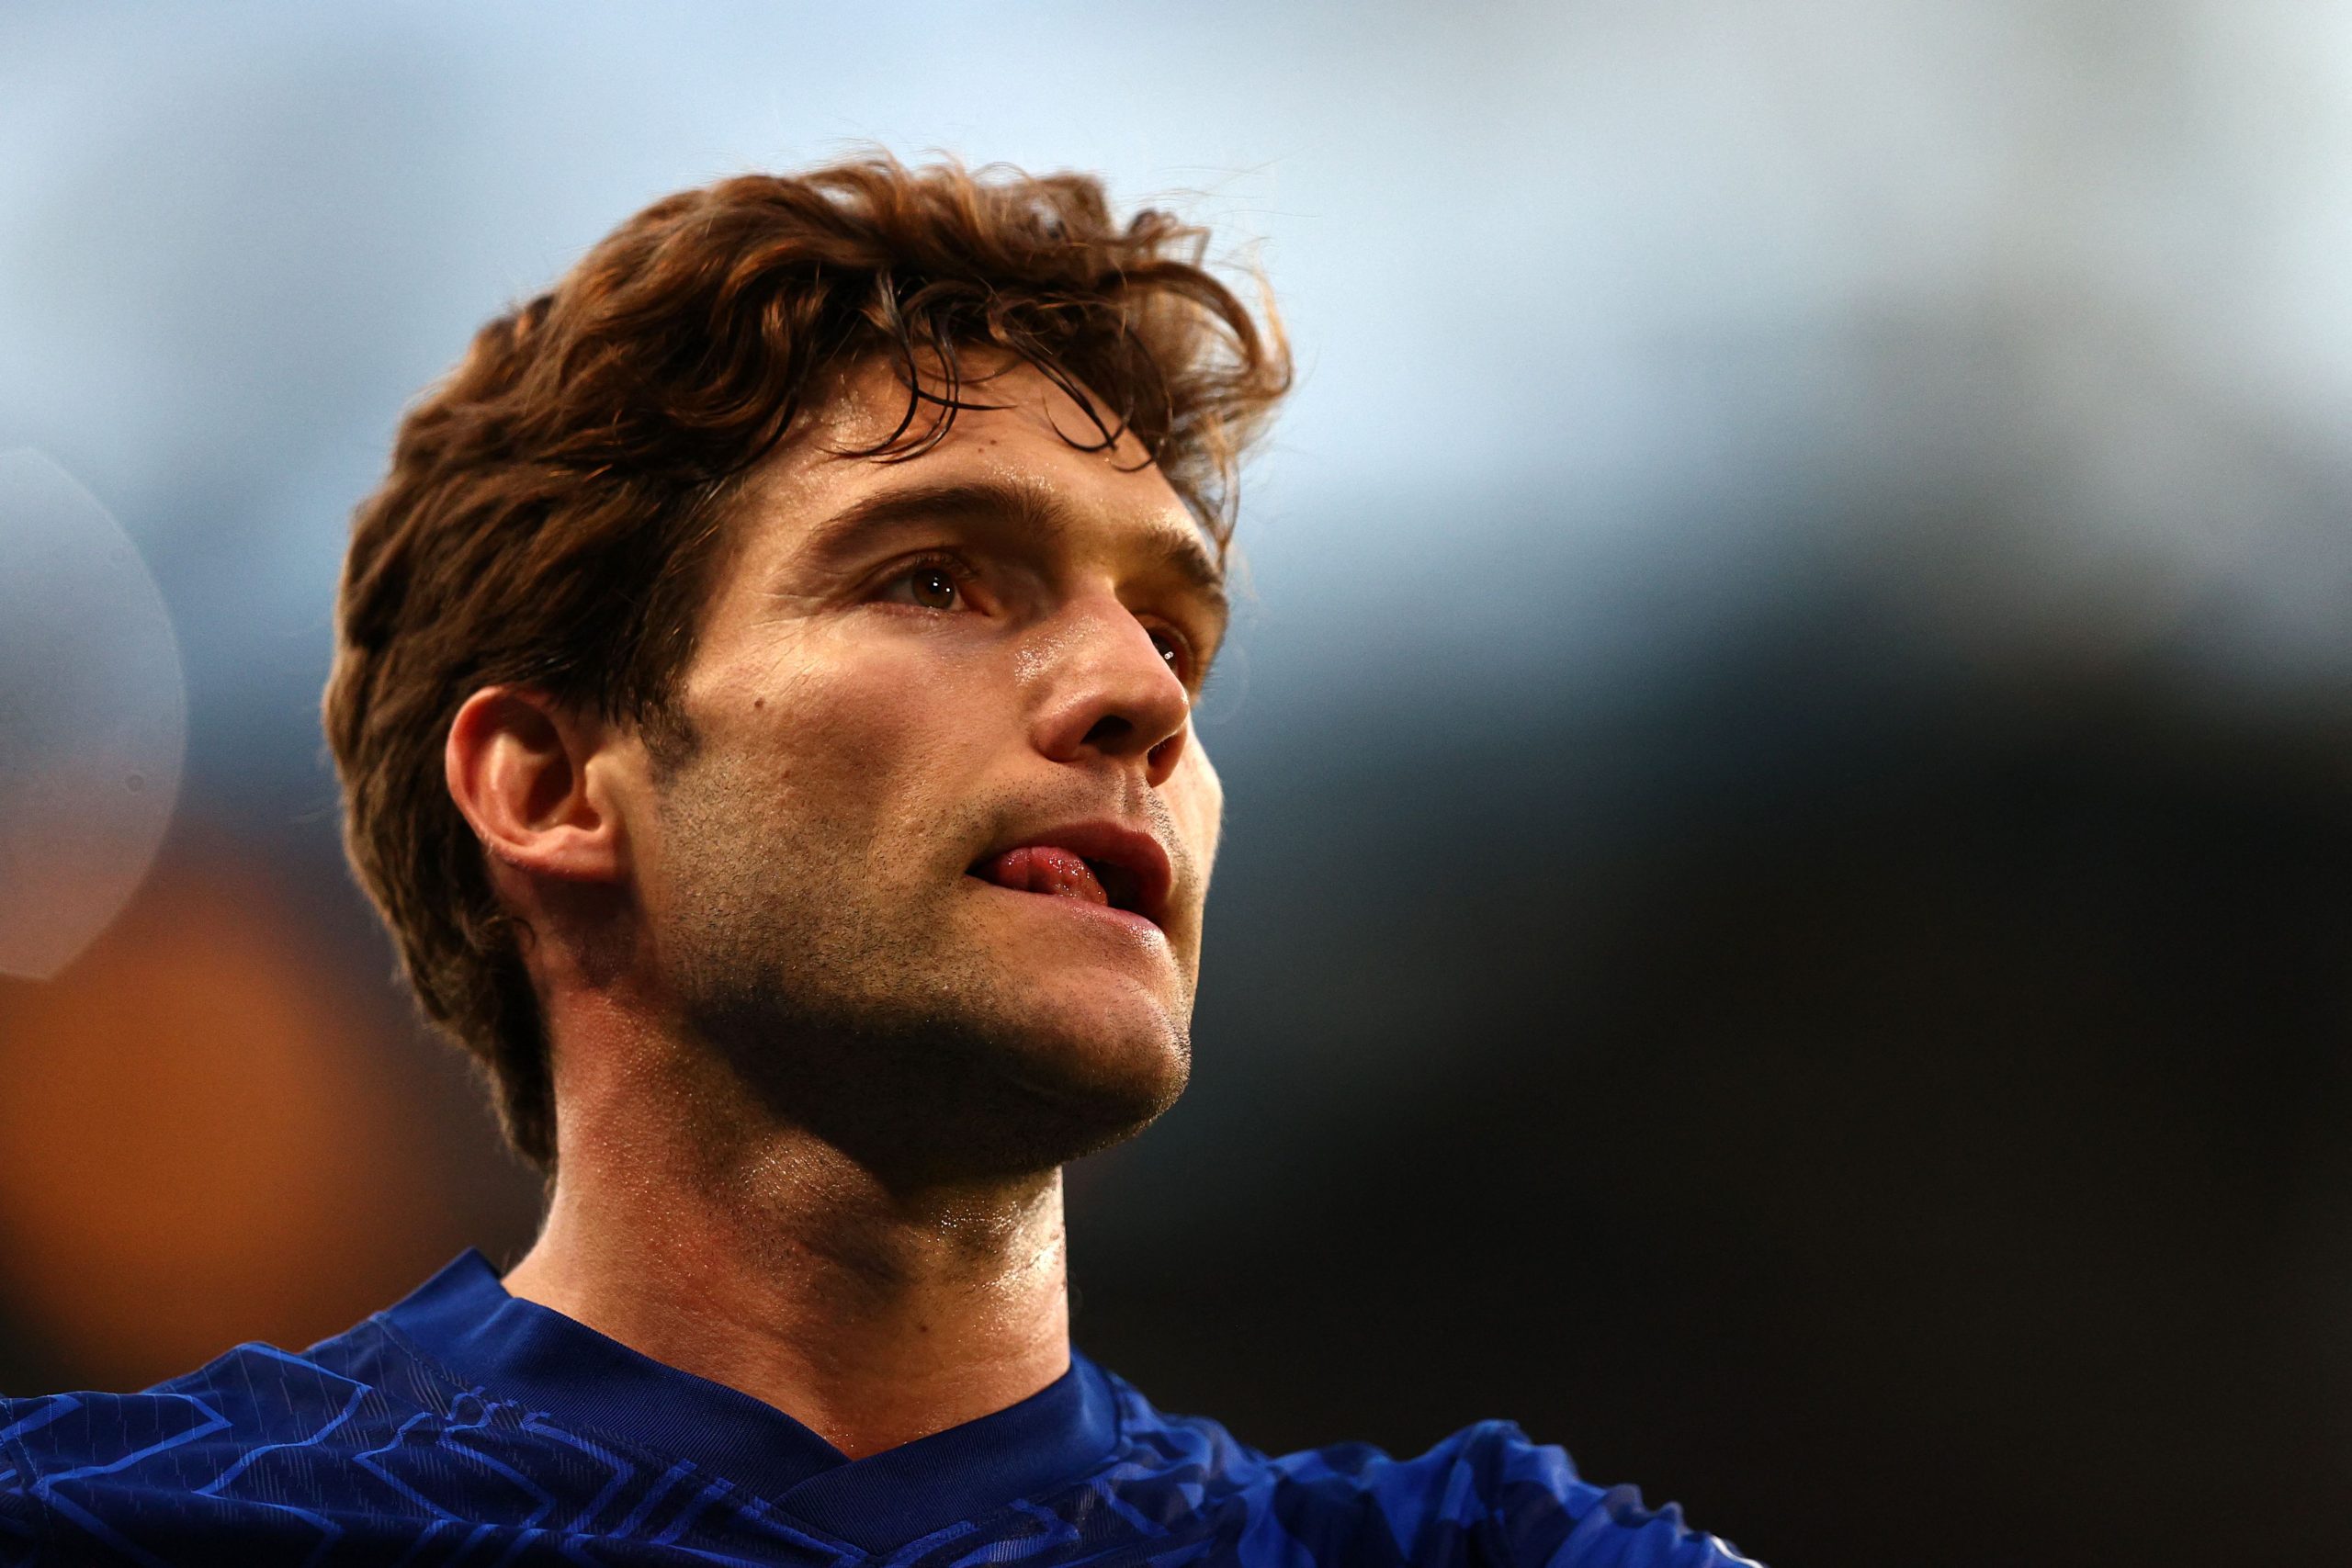 Marcos Alonso in action for Chelsea during a Premier League game. (Photo by ADRIAN DENNIS/AFP via Getty Images)